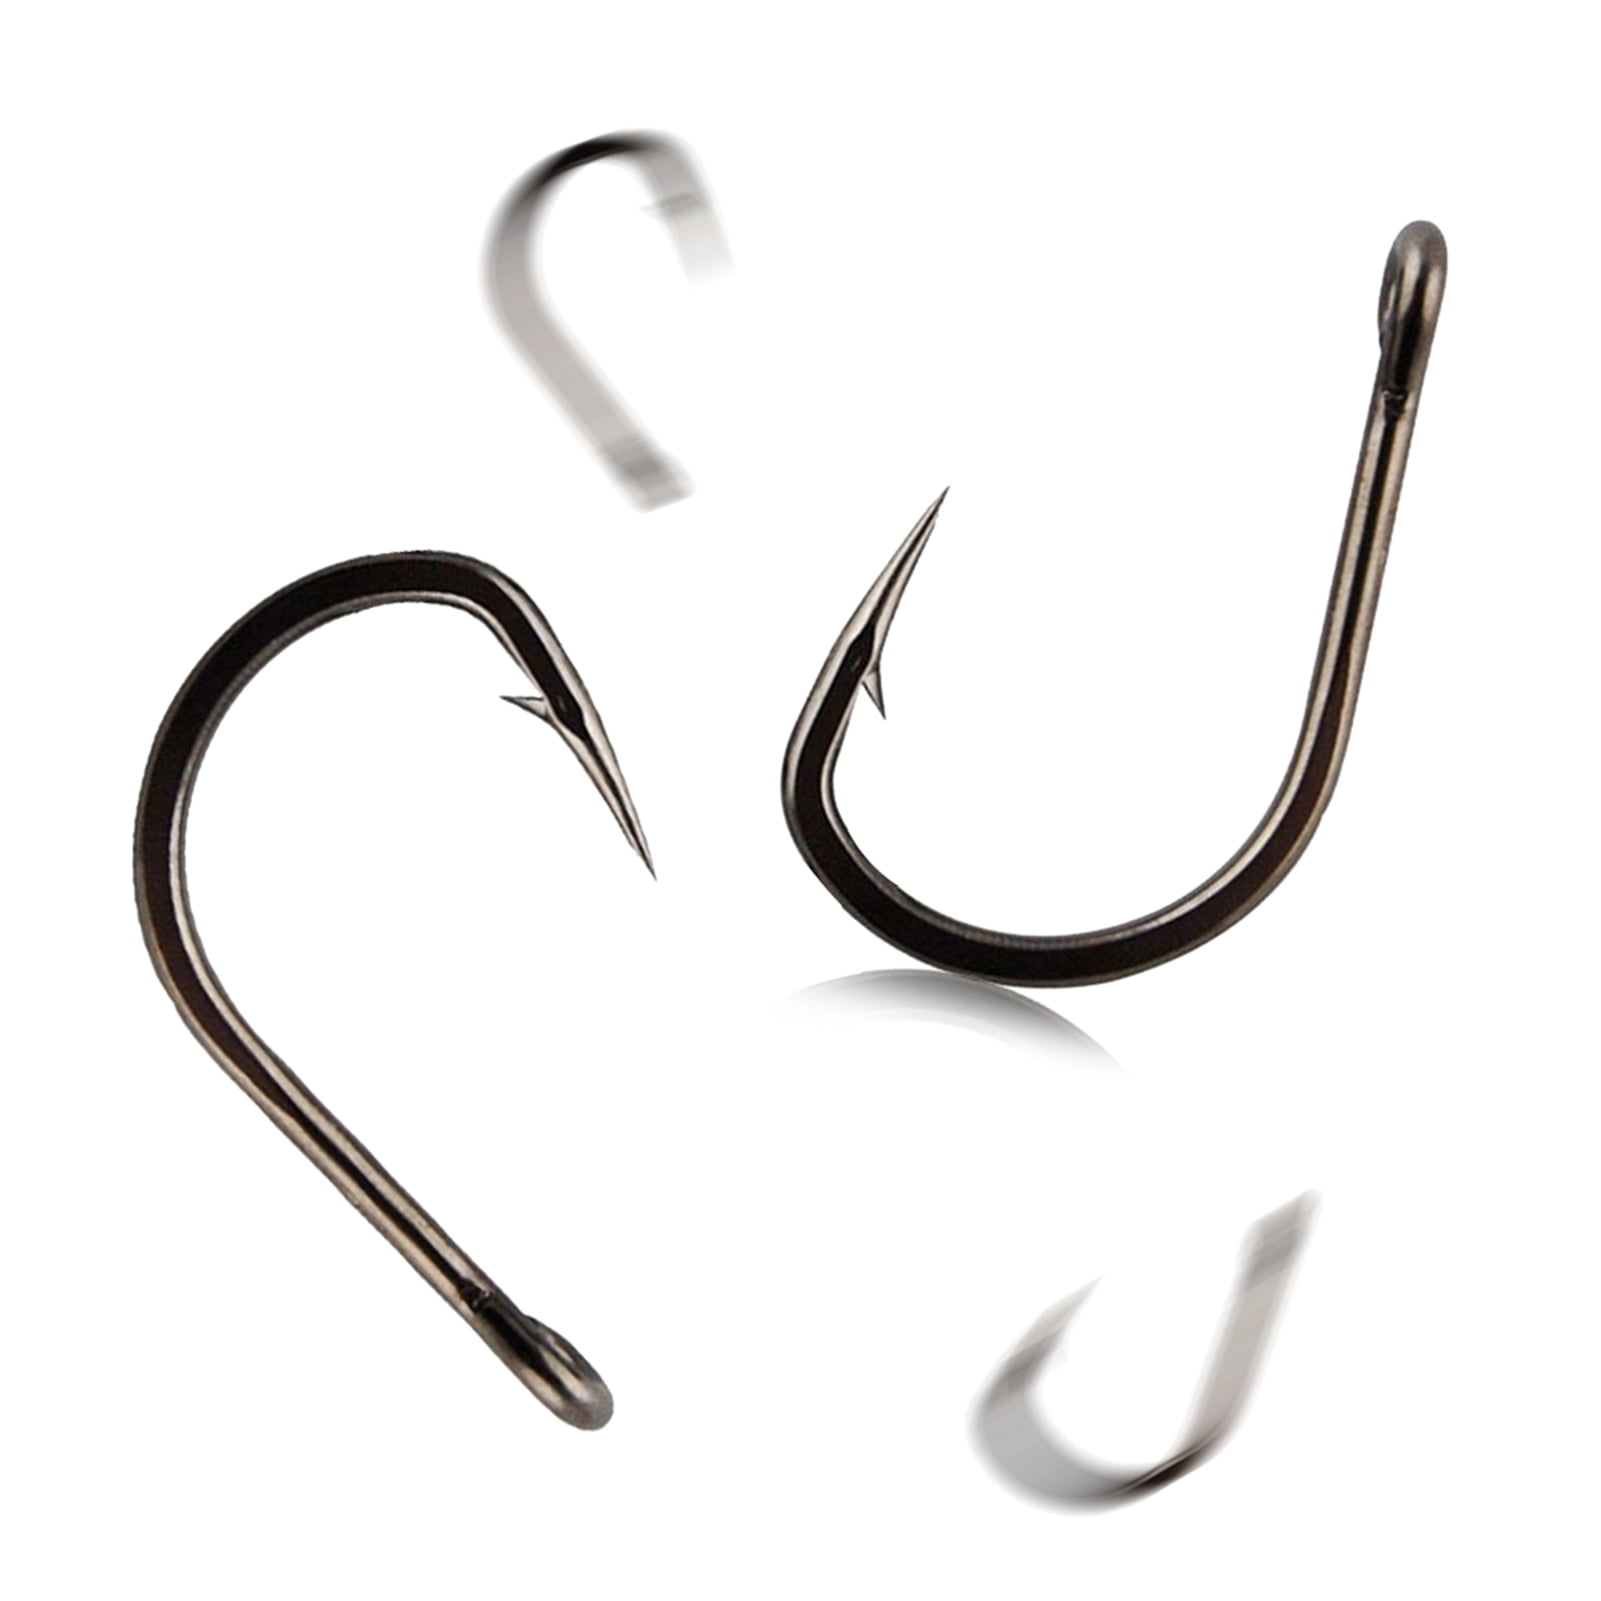 Fishing Hook, 45pcs Fishing Tackle Kit Continuous Sharpness for